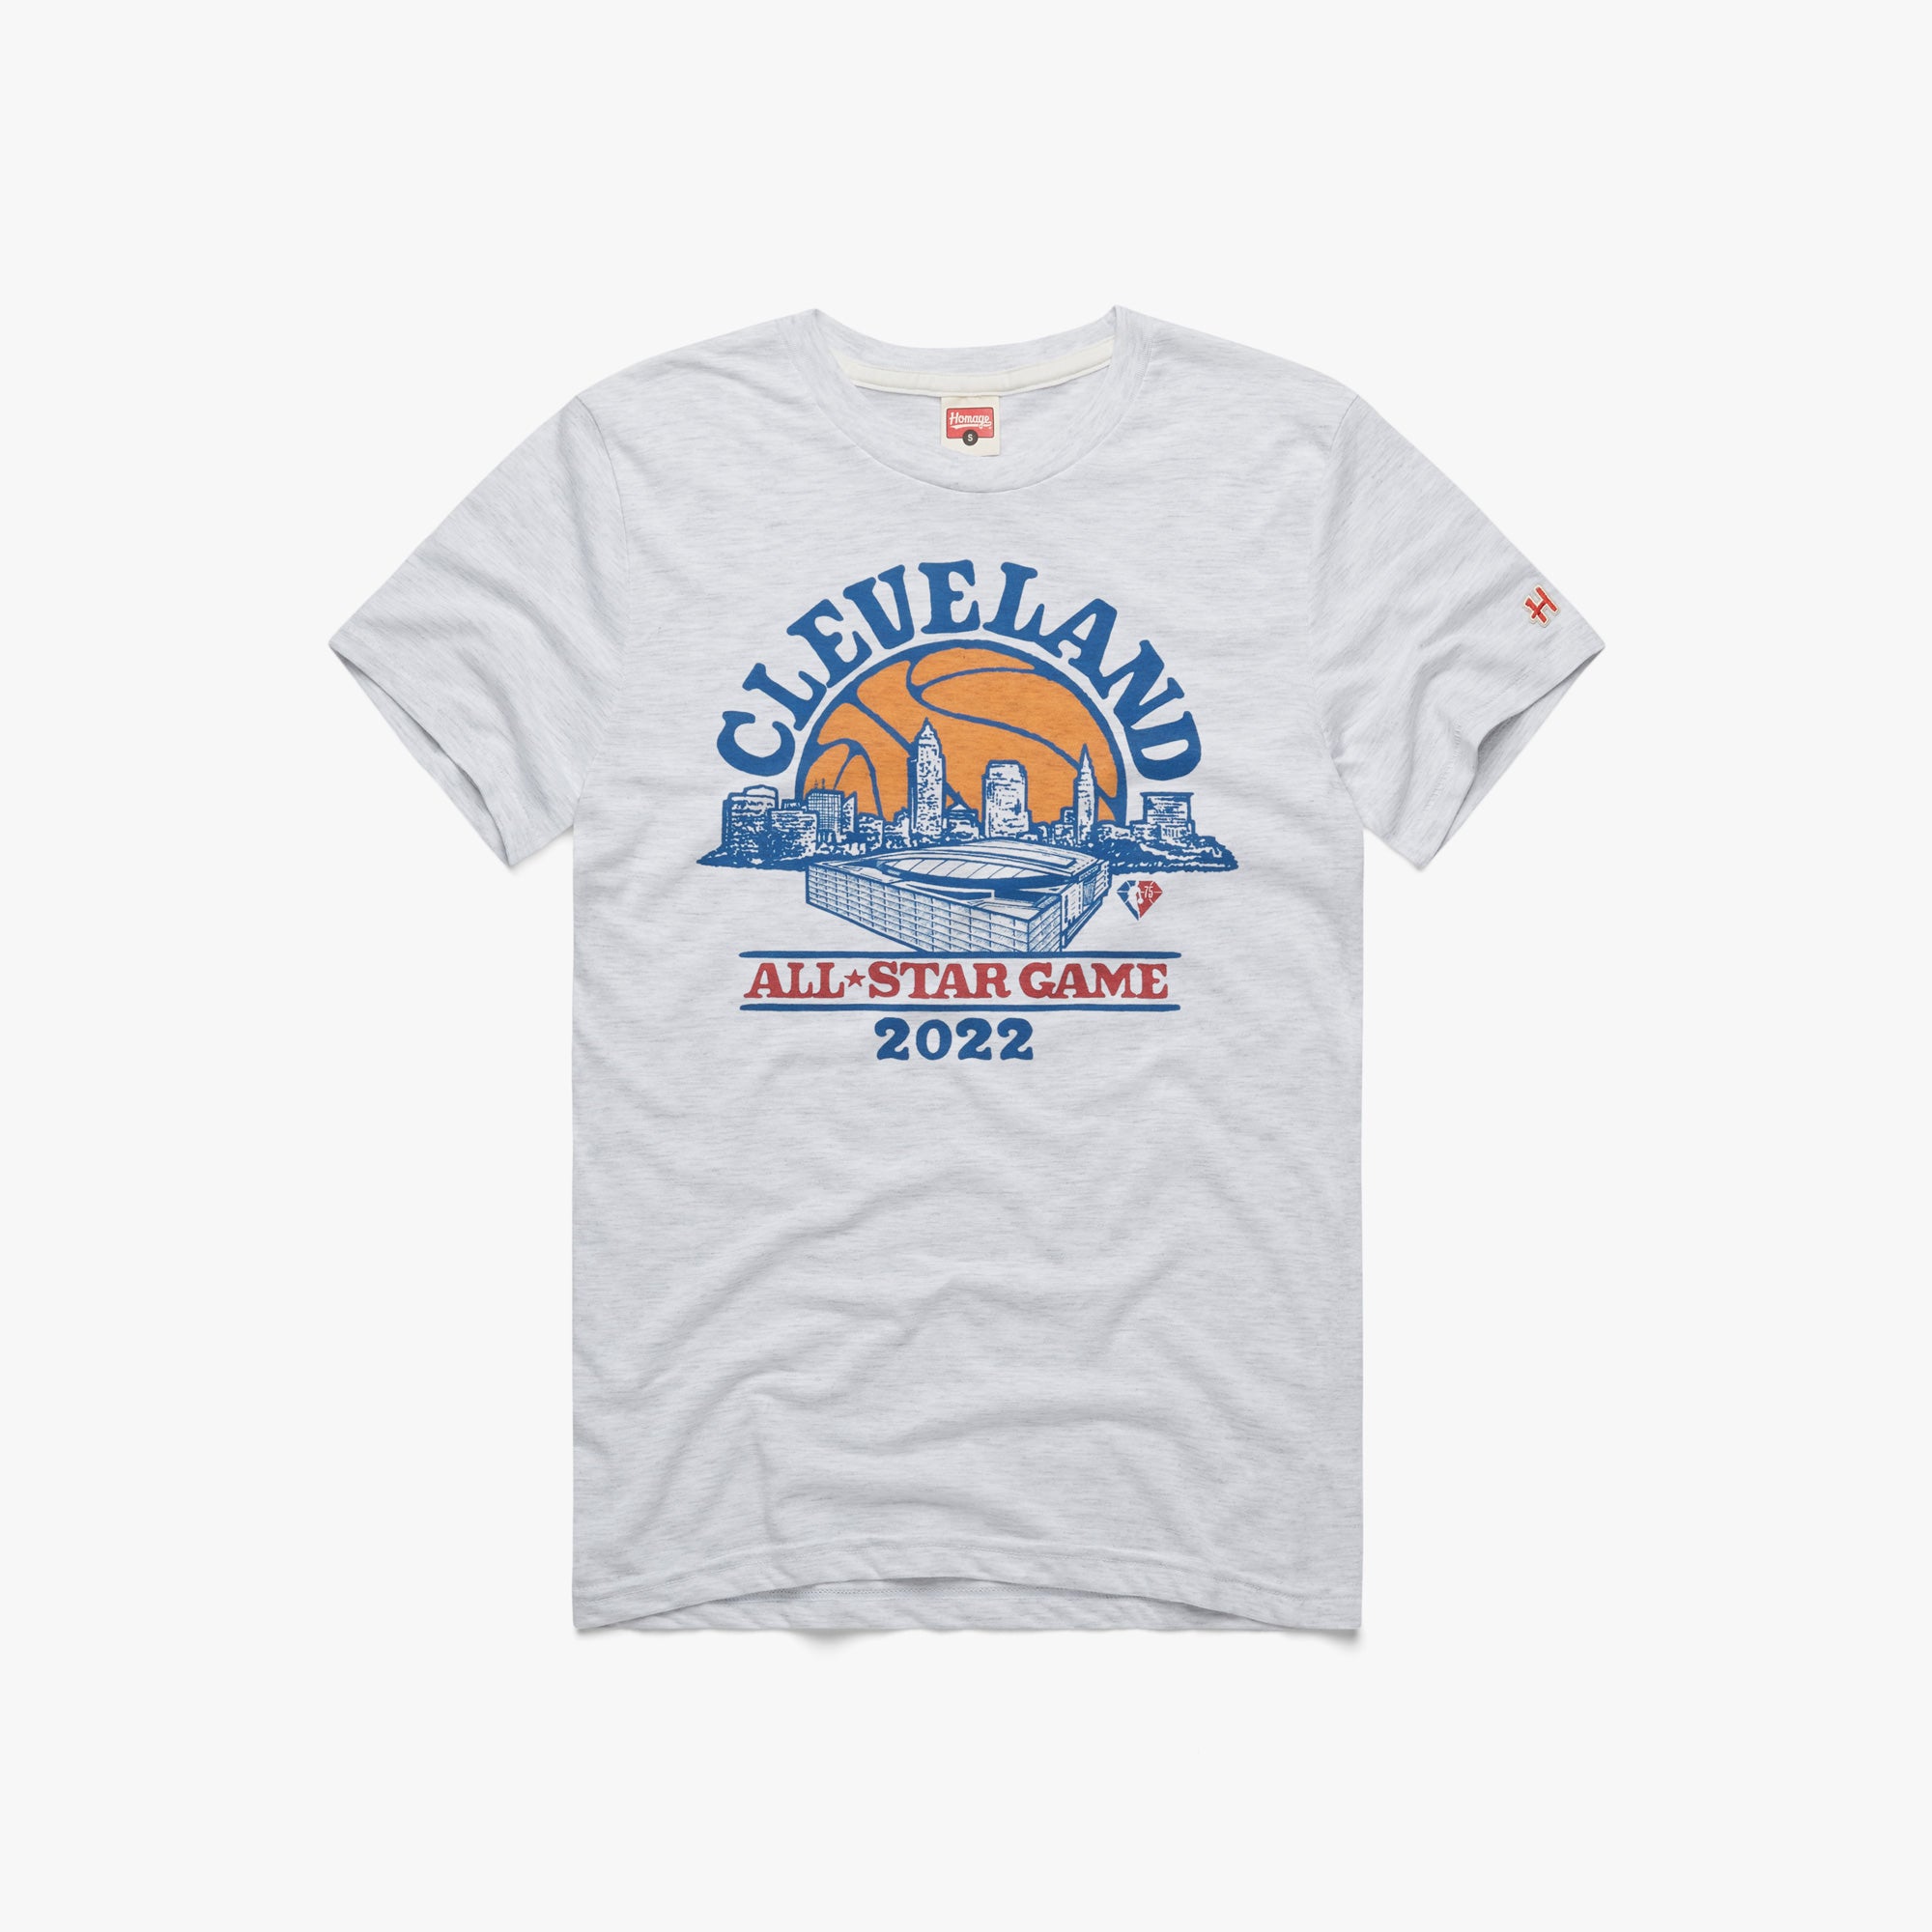 Cleveland NBA All Star Game 2022 T-Shirt from Homage. | Ash | Vintage Apparel from Homage.